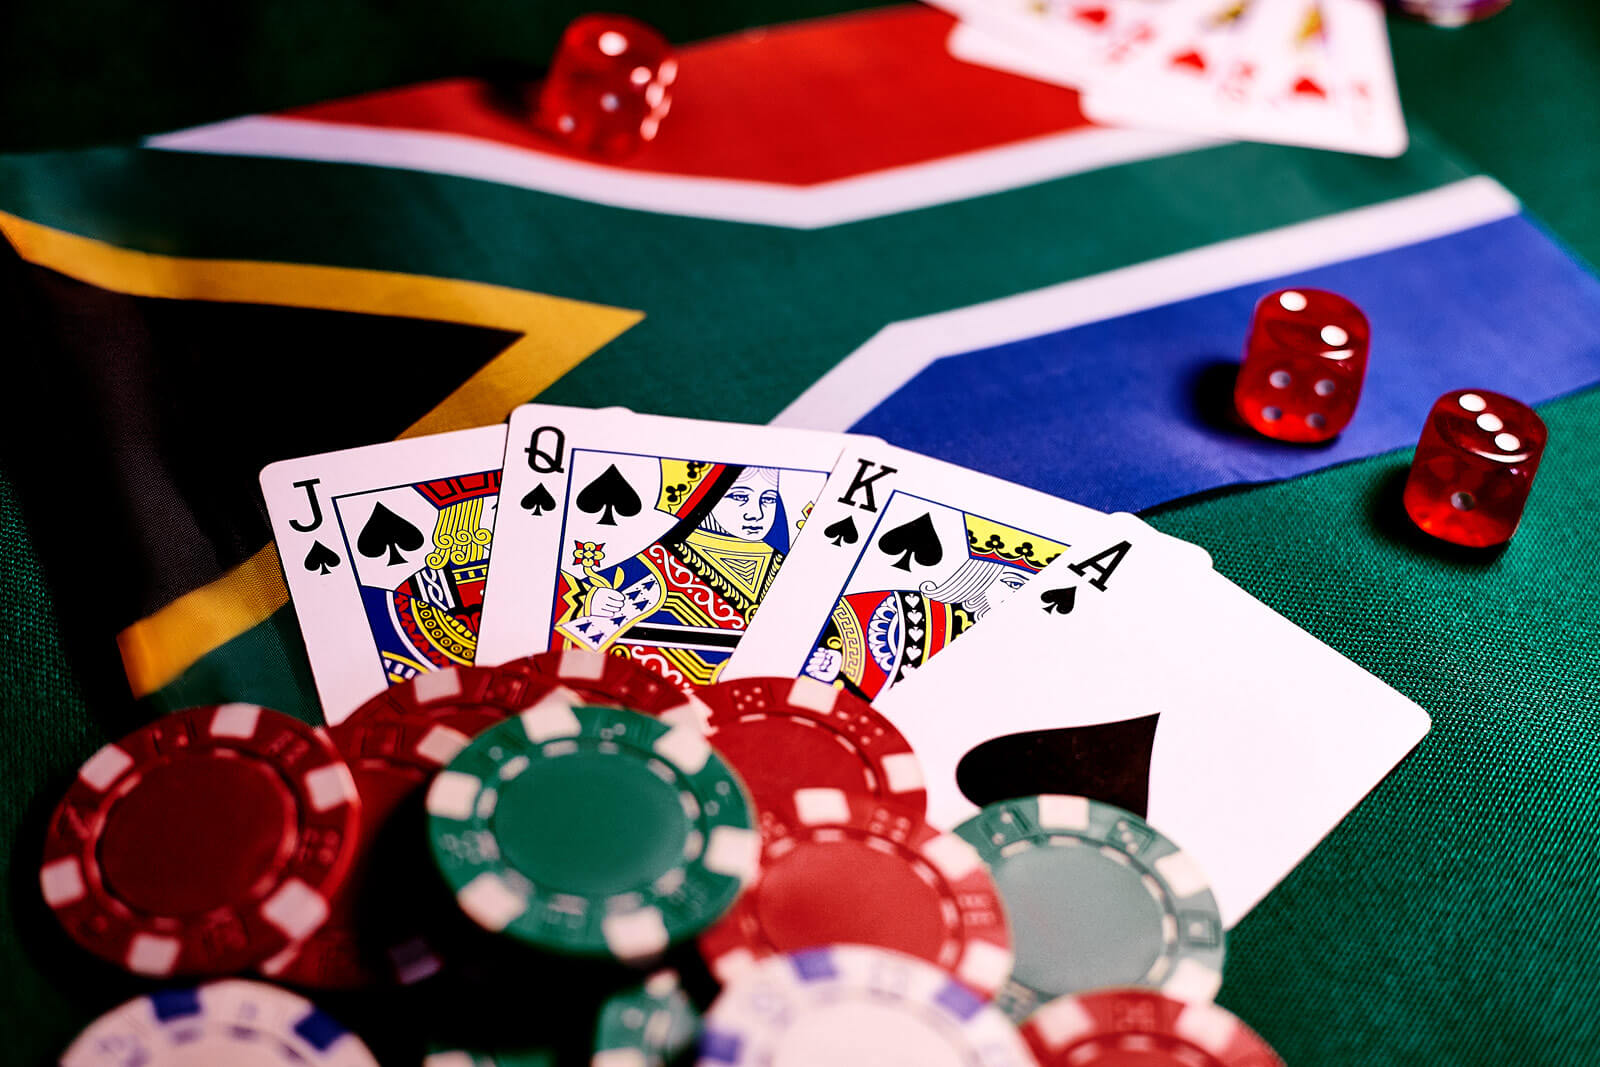 How To Start Your Online Casino Account